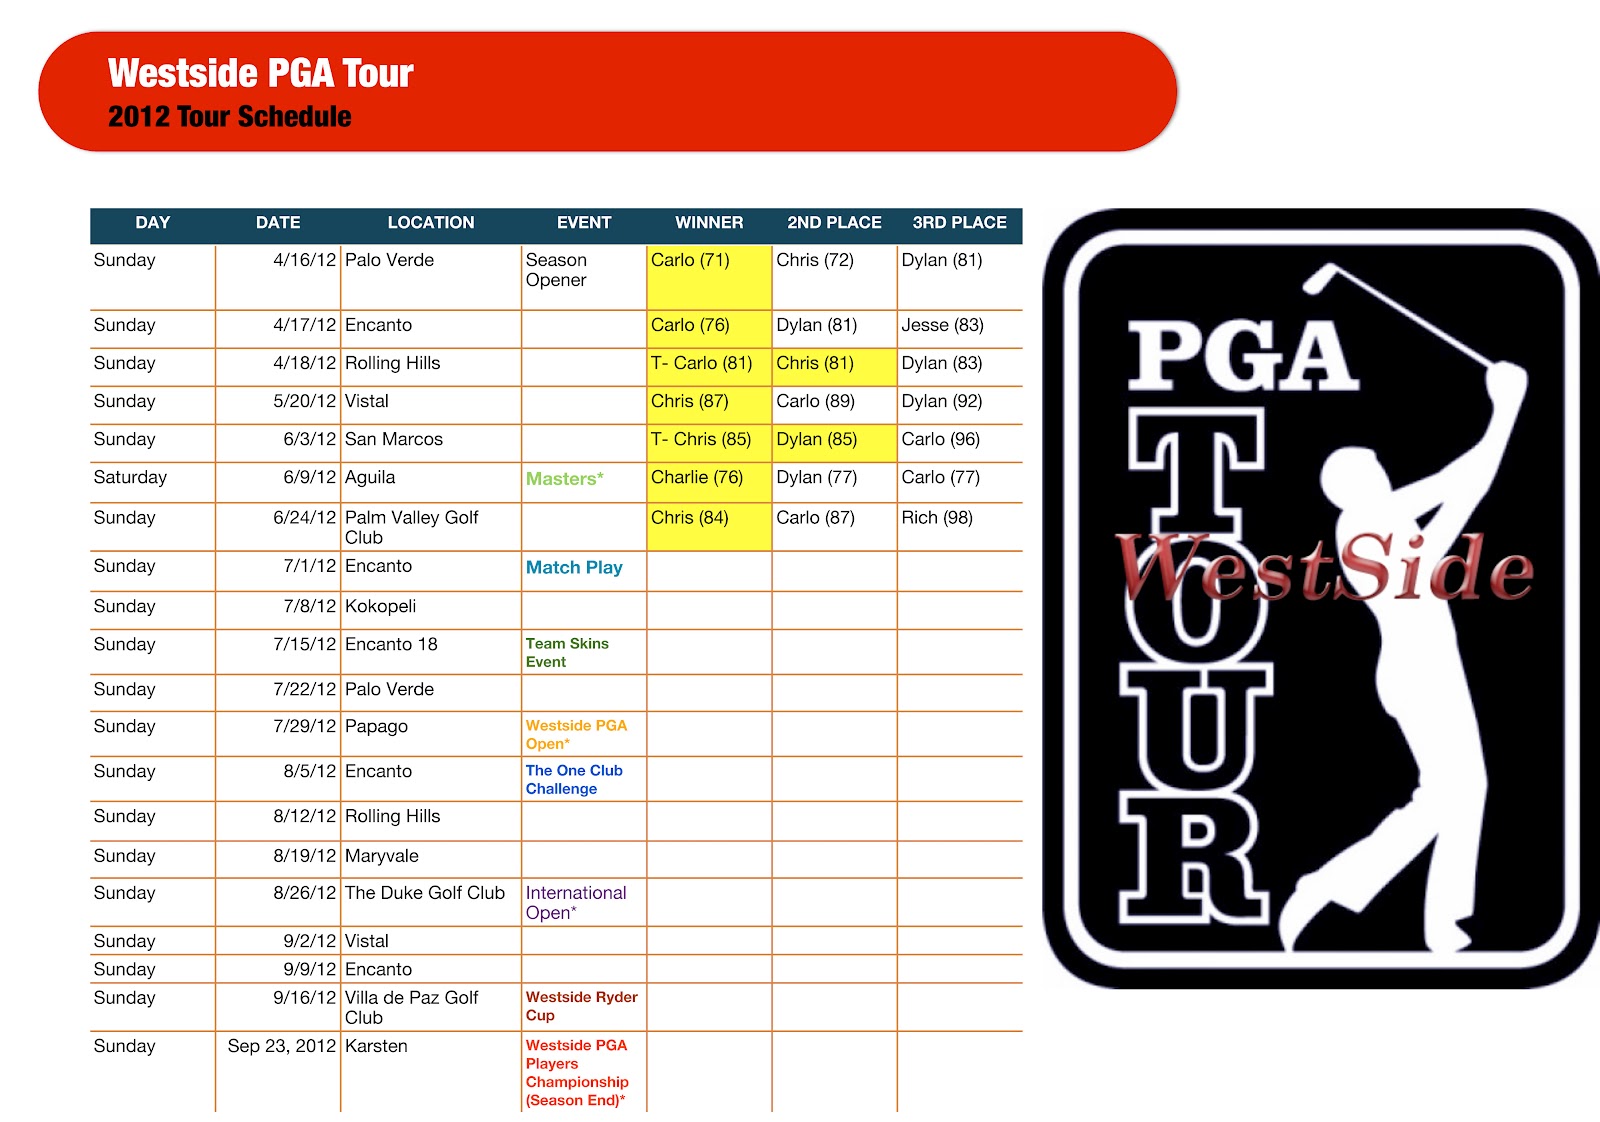 Westside PGA Tour What a weekend for the Tour!